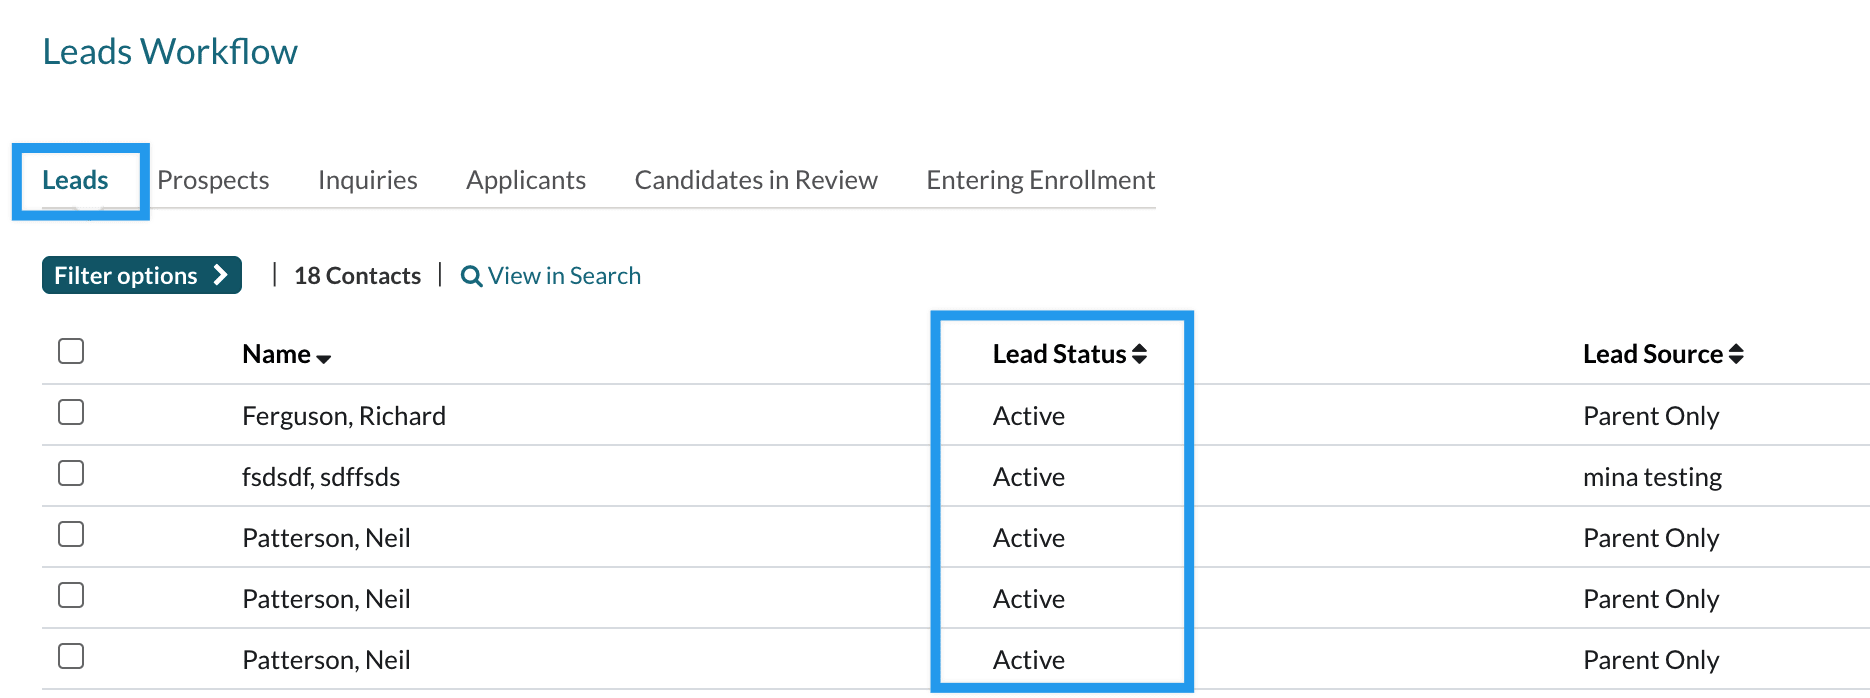 Lead Workflow page with the Lead Status column highlighted.